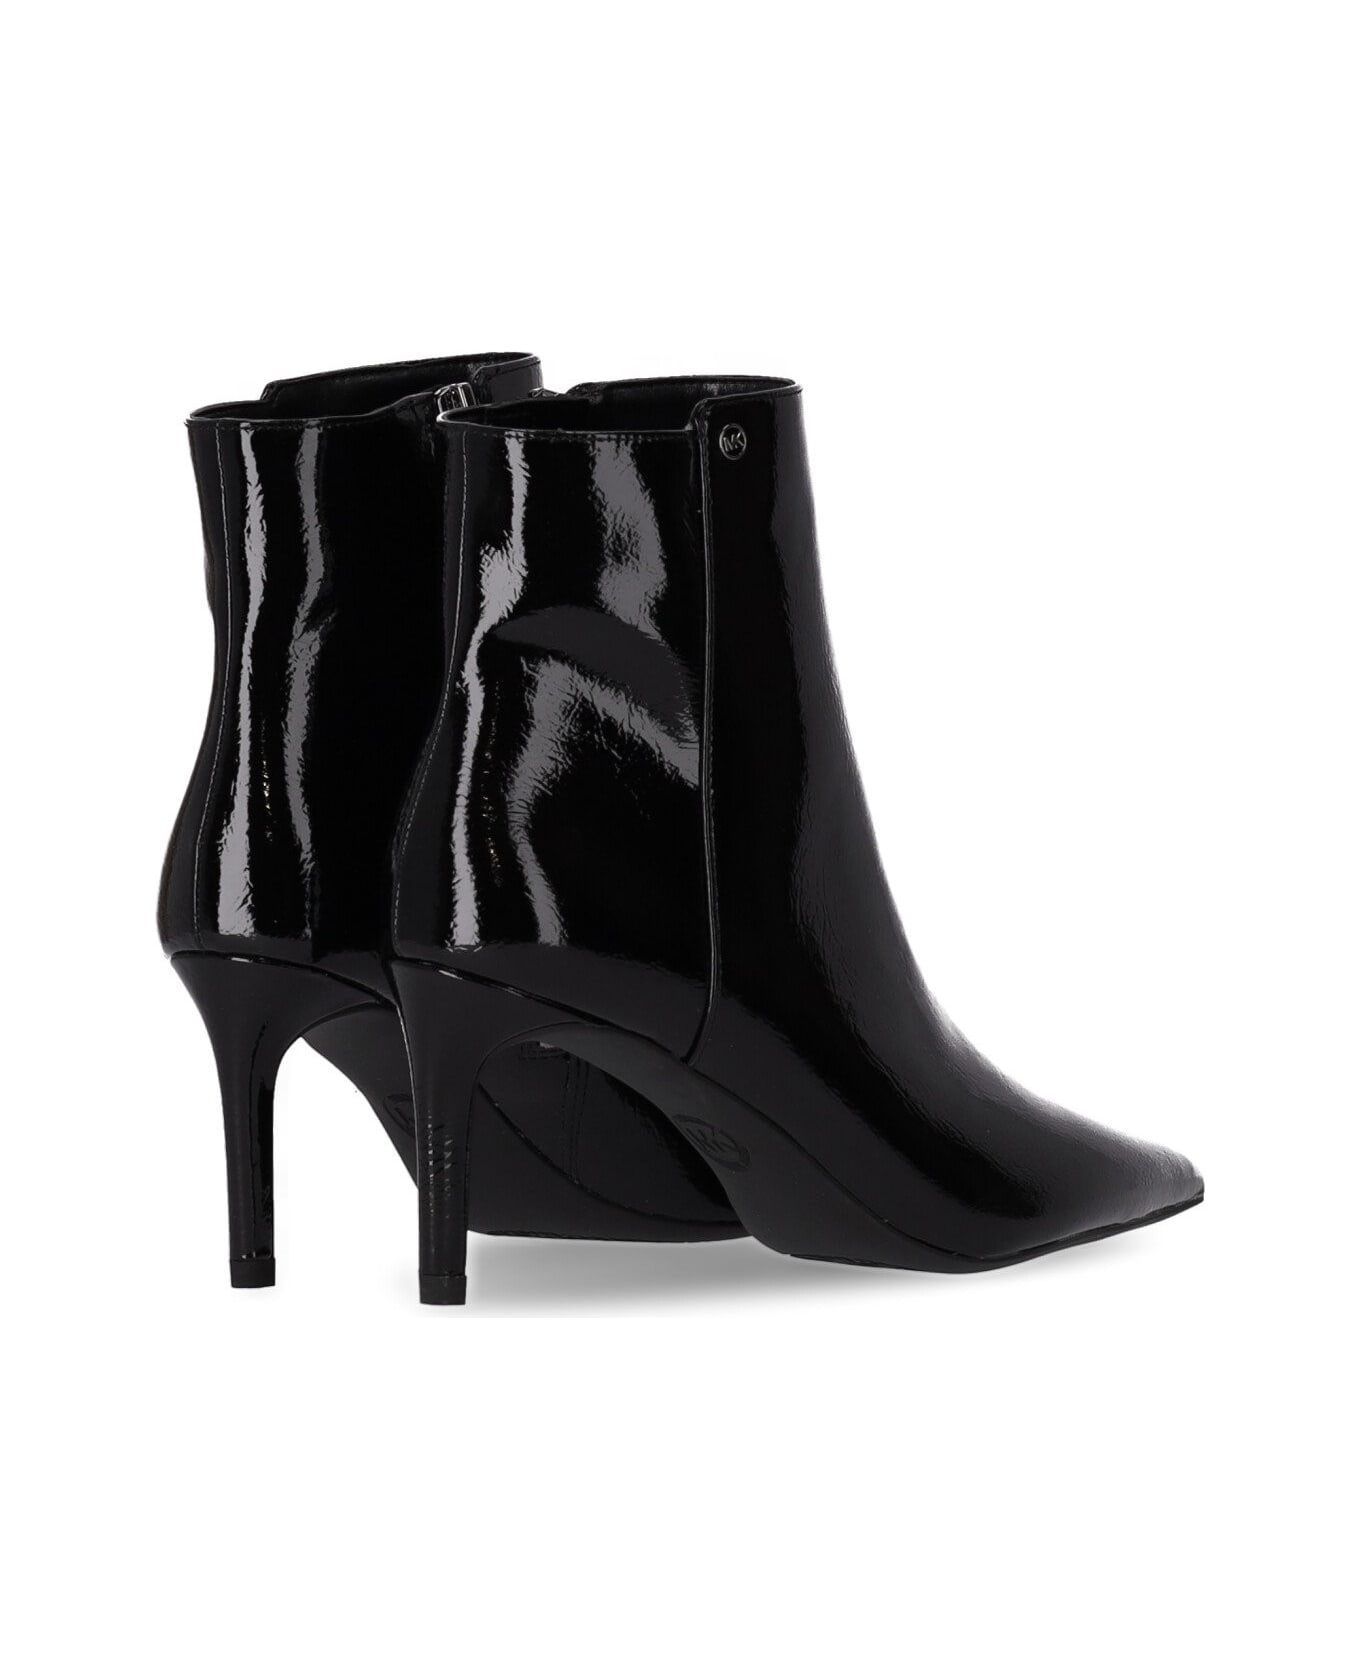 Michael Kors Polished Pointed Toe Ankle Boots - Nero